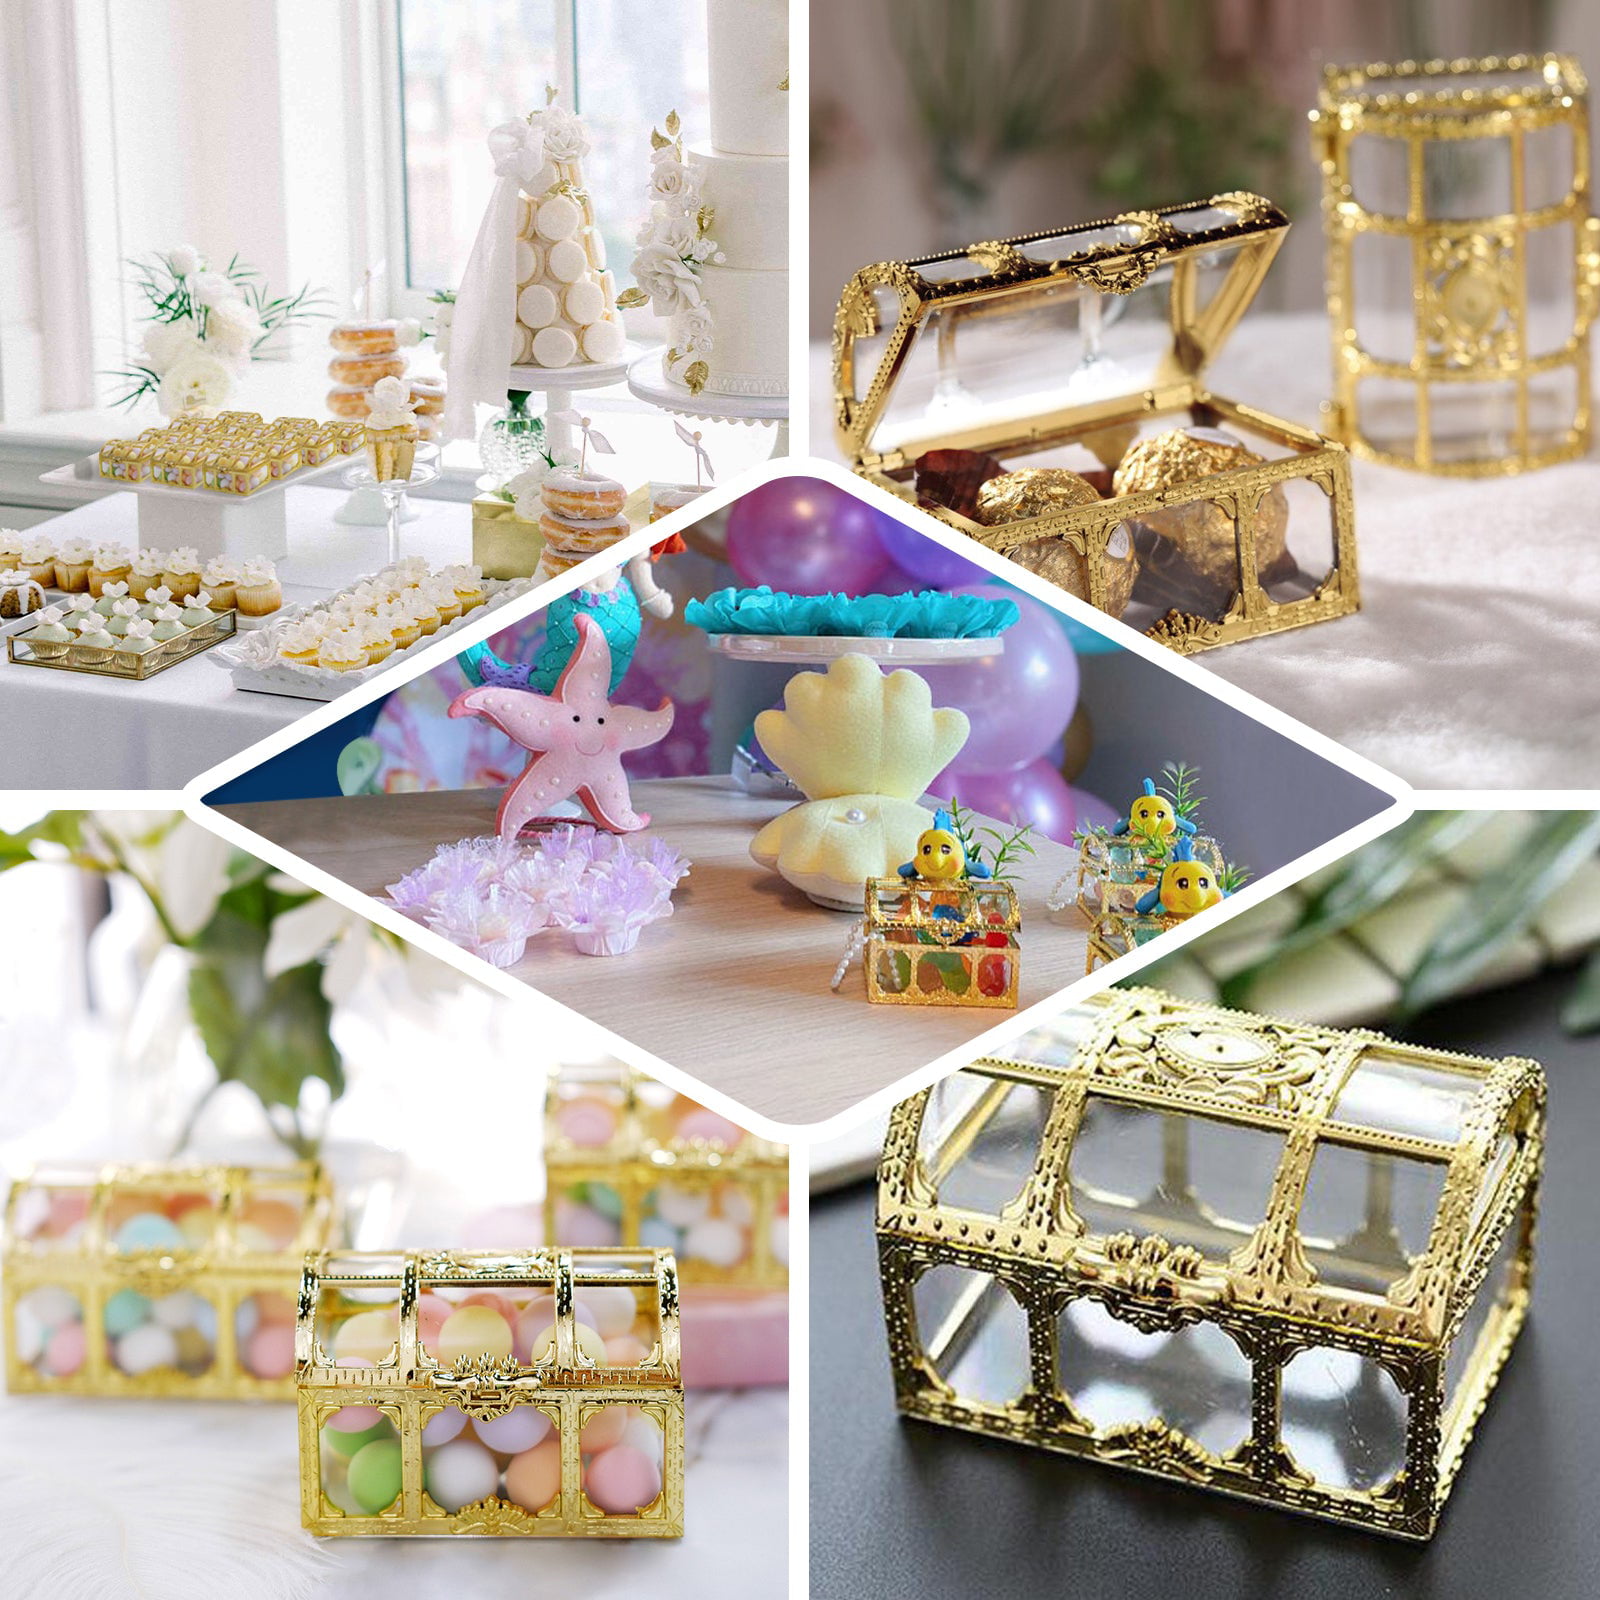 Warmtree 12 Pcs Candy Boxes Plastic Wedding Favor Boxes Candy Jars Candy Storage Boxes Gift Boxes for Wedding Baby Shower Christmas Birthday Party